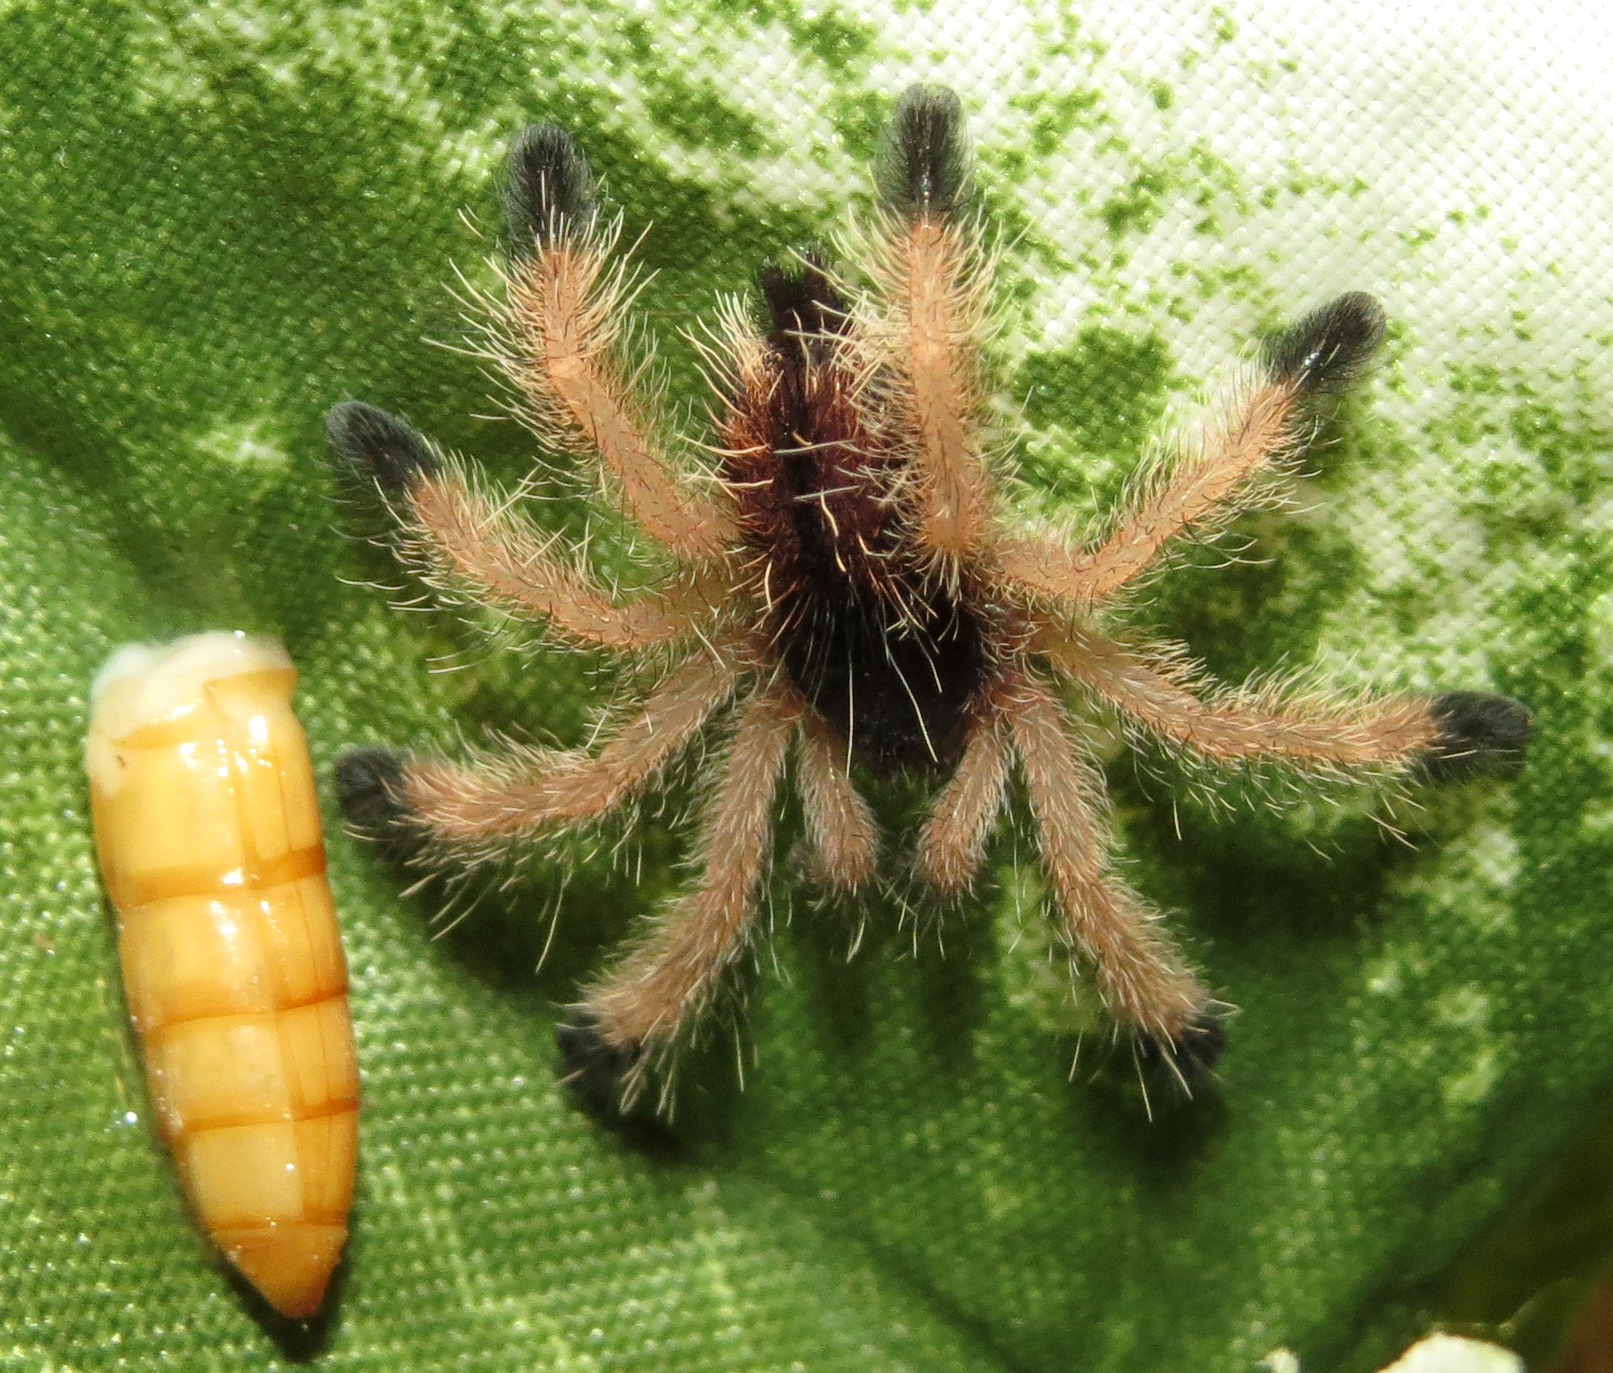 Avicularia avicularia Sling With Mealworm (♀ 0.75")